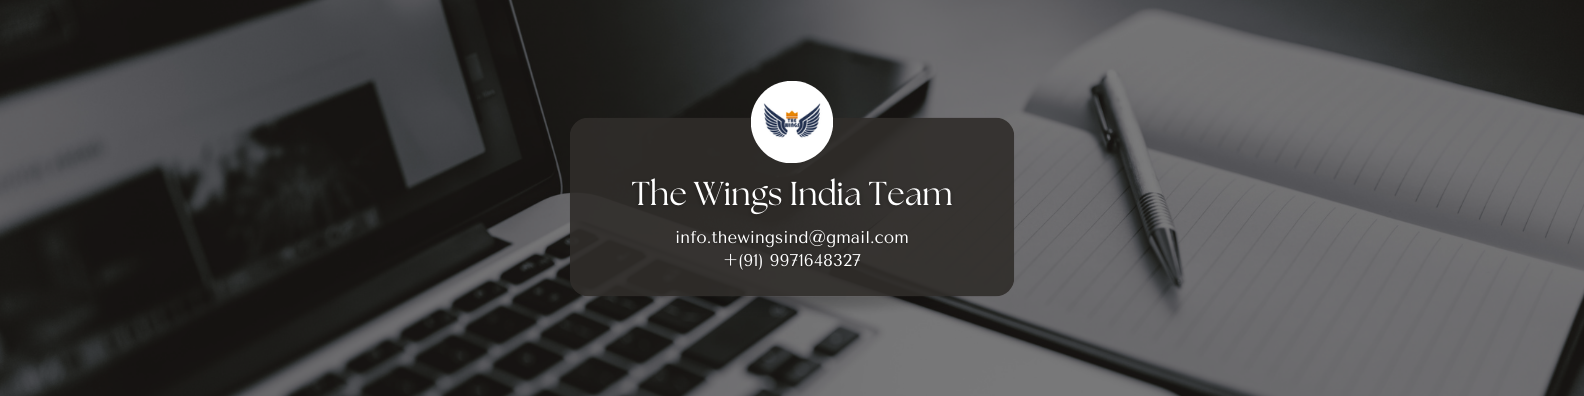 The Wings India - Team